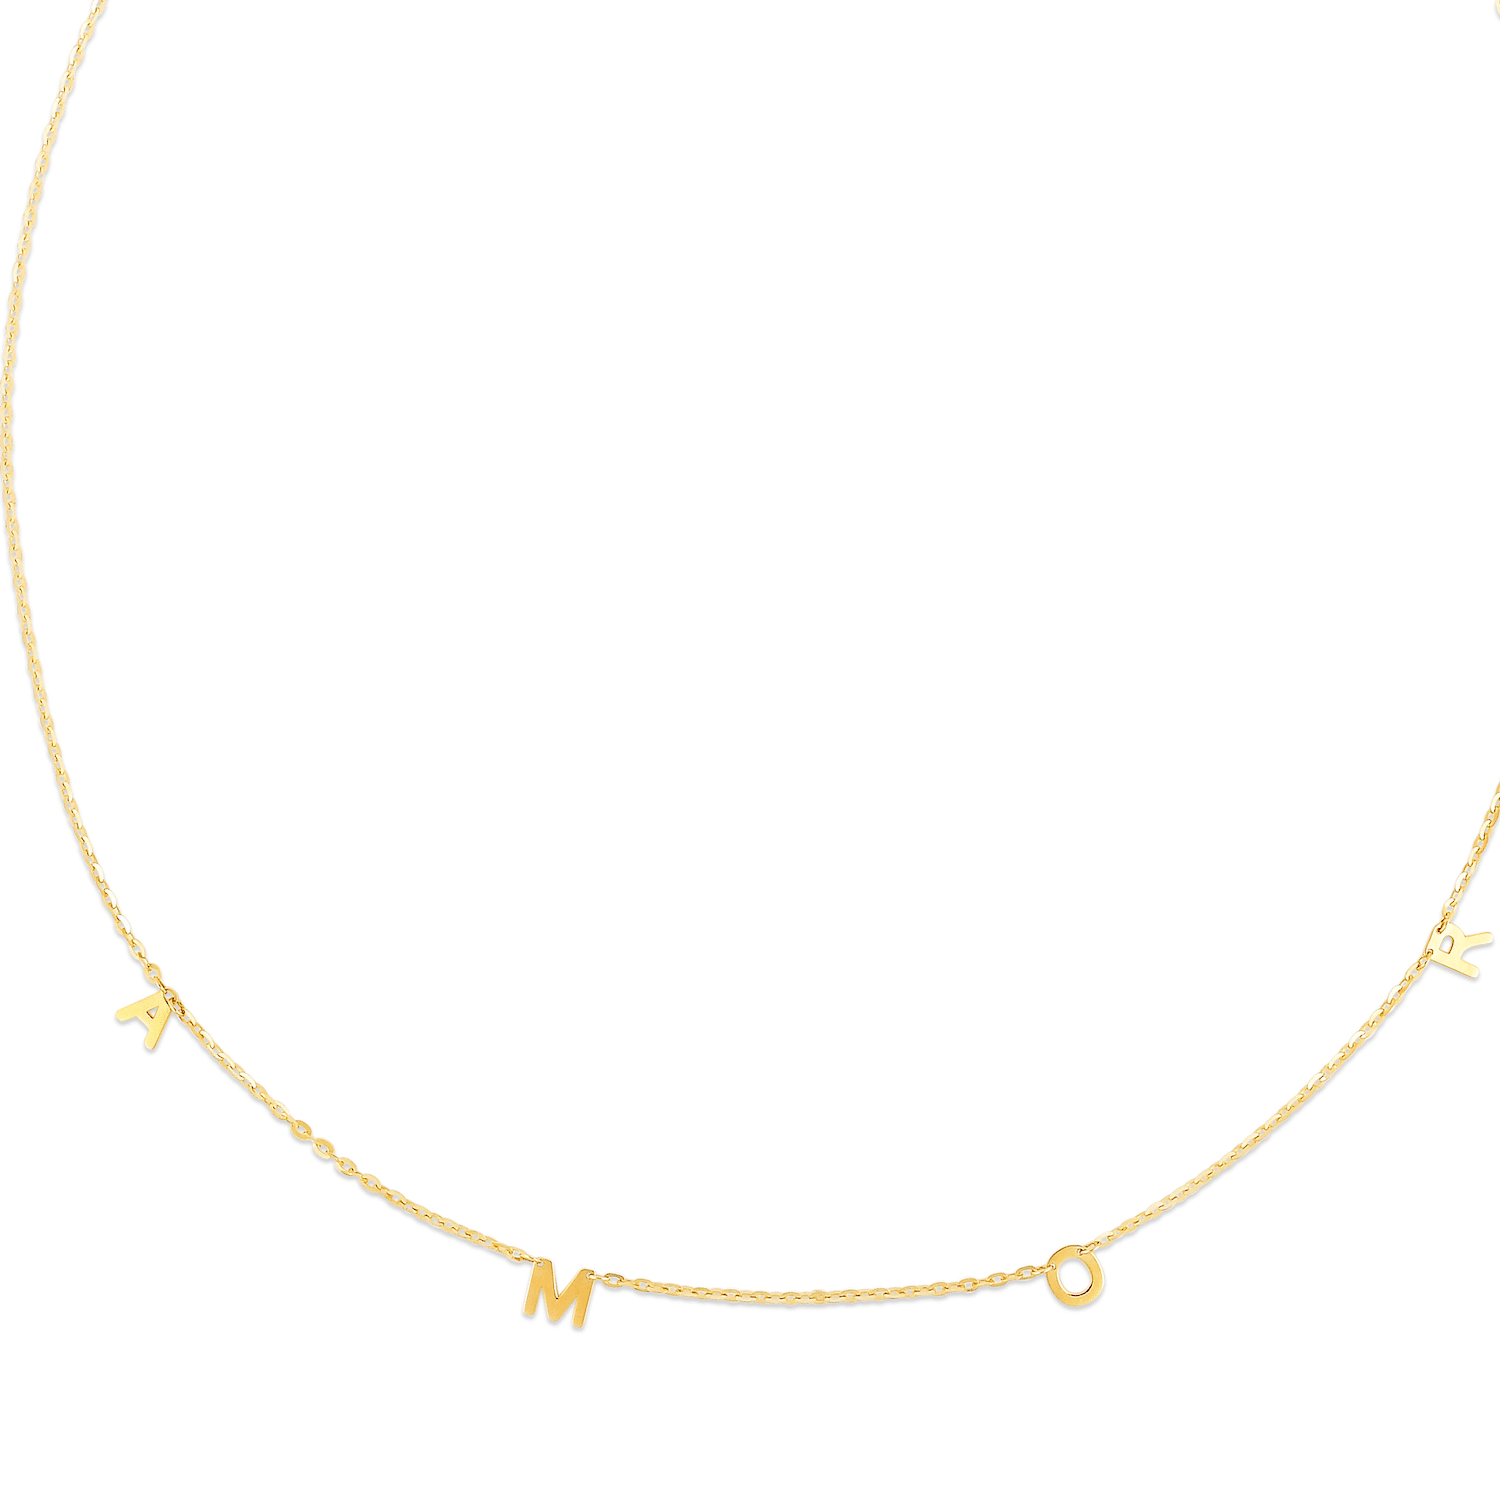 14K Yellow Gold AMOR (LOVE) Pendant Chain Necklace 16"-18" Adjustable